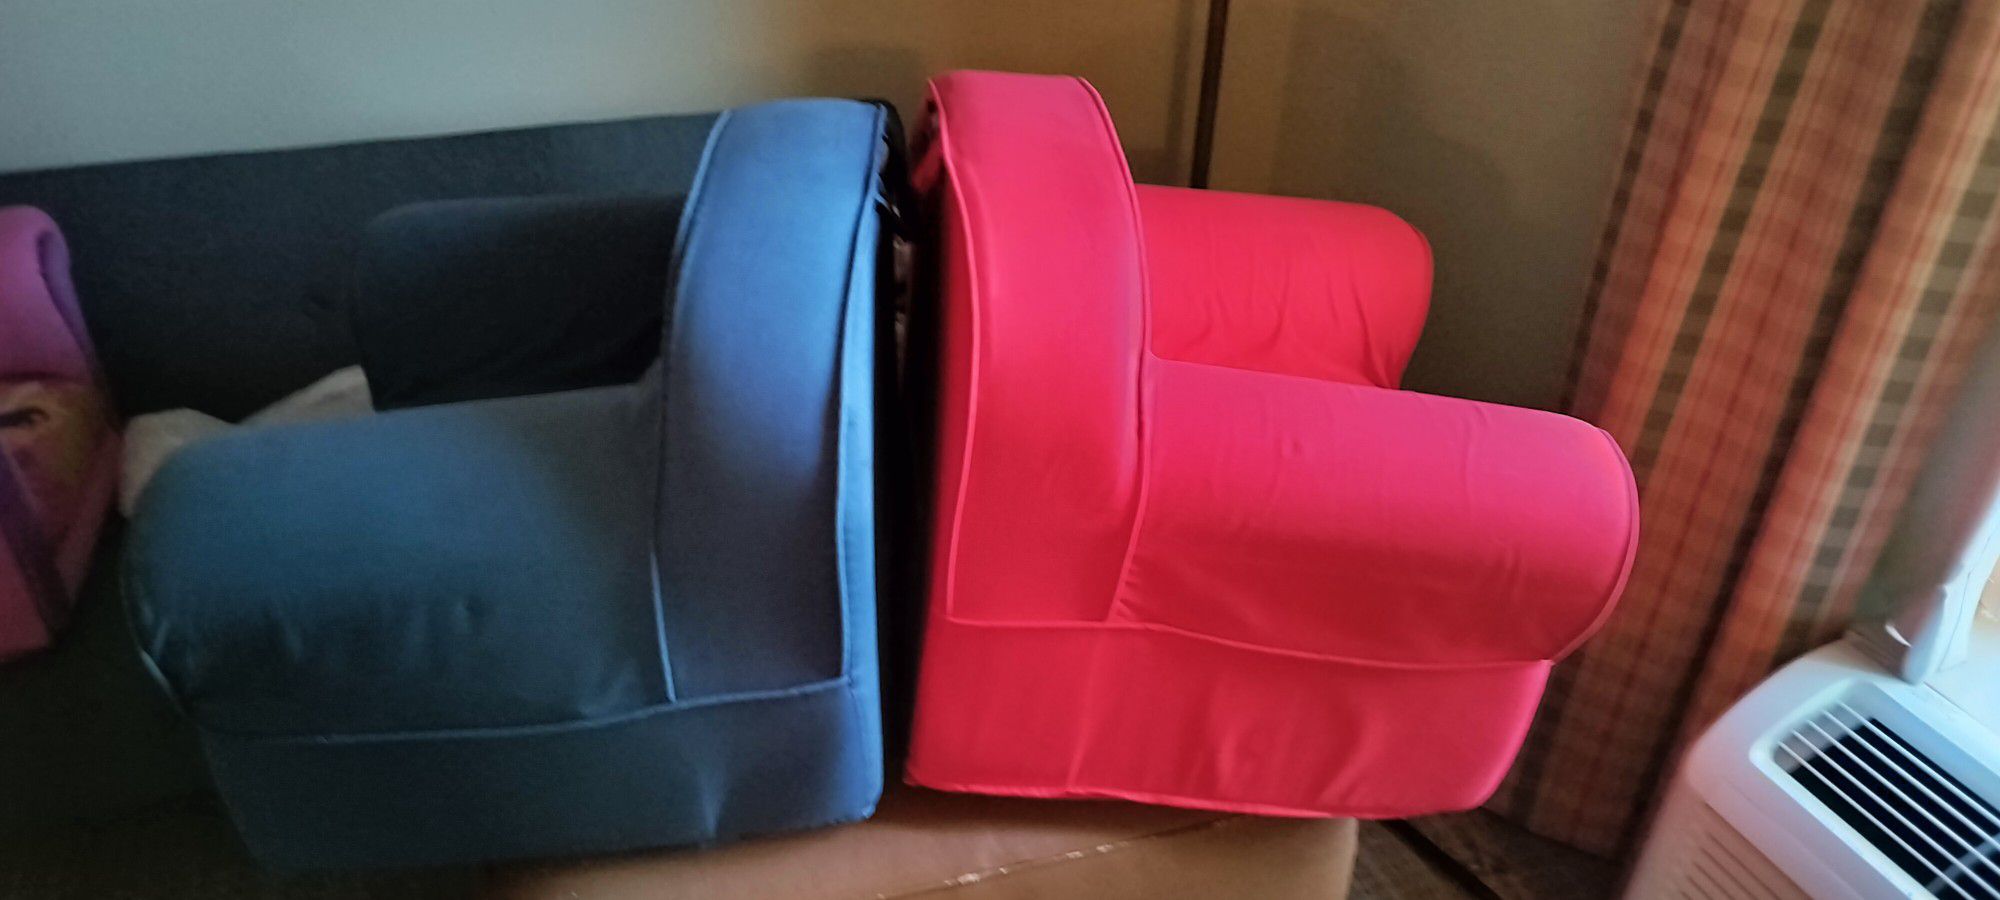 The Land Of Nod To Styrofoam Armchairs Children's Two Of Them $10 Each